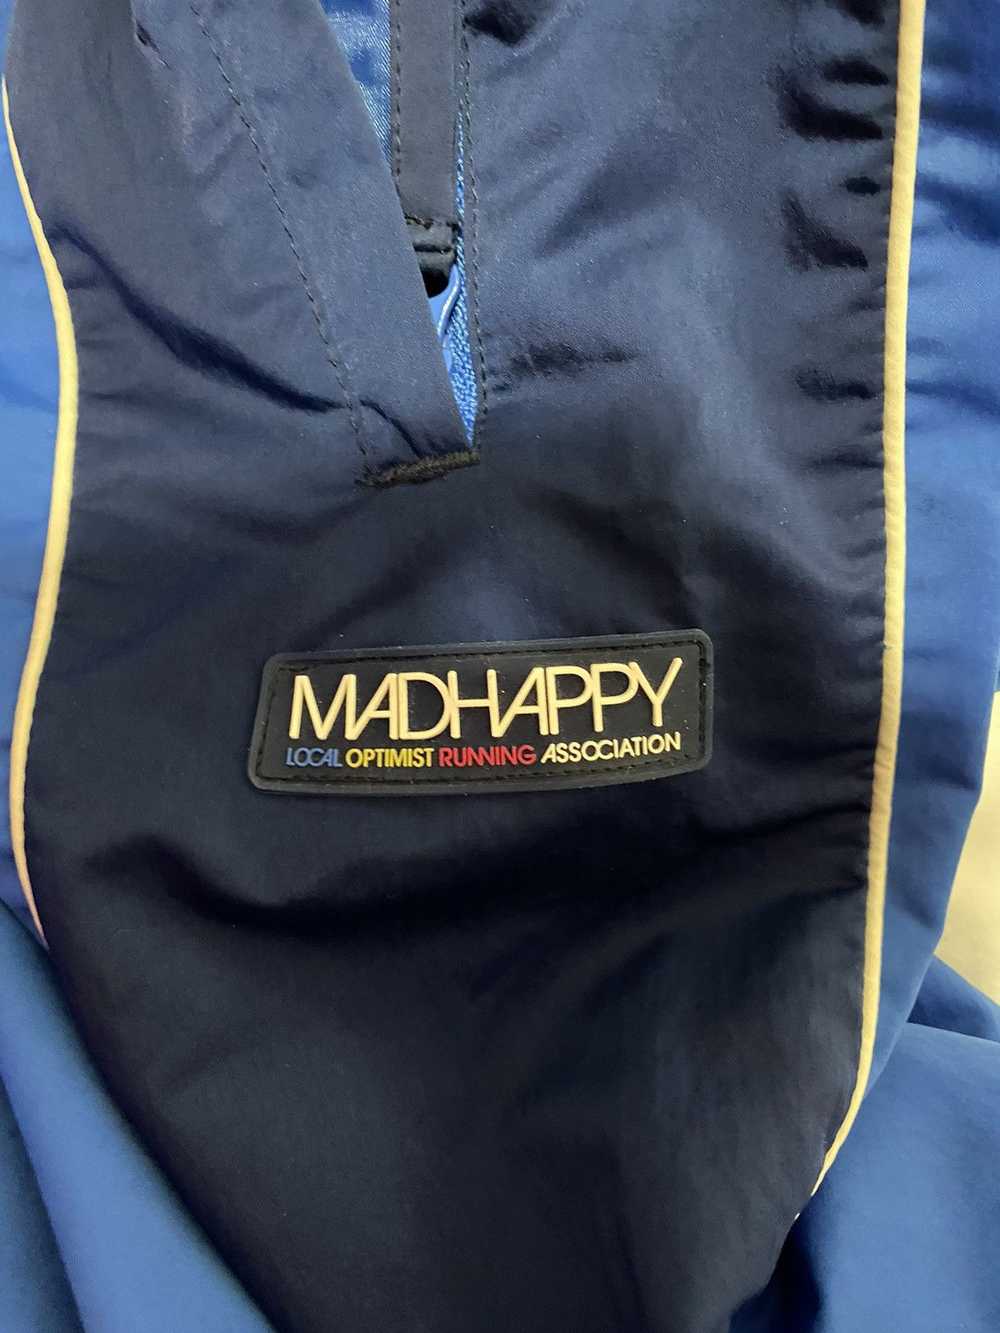 Madhappy Madhappy L.O.R.A. WARM UP PANT - image 5